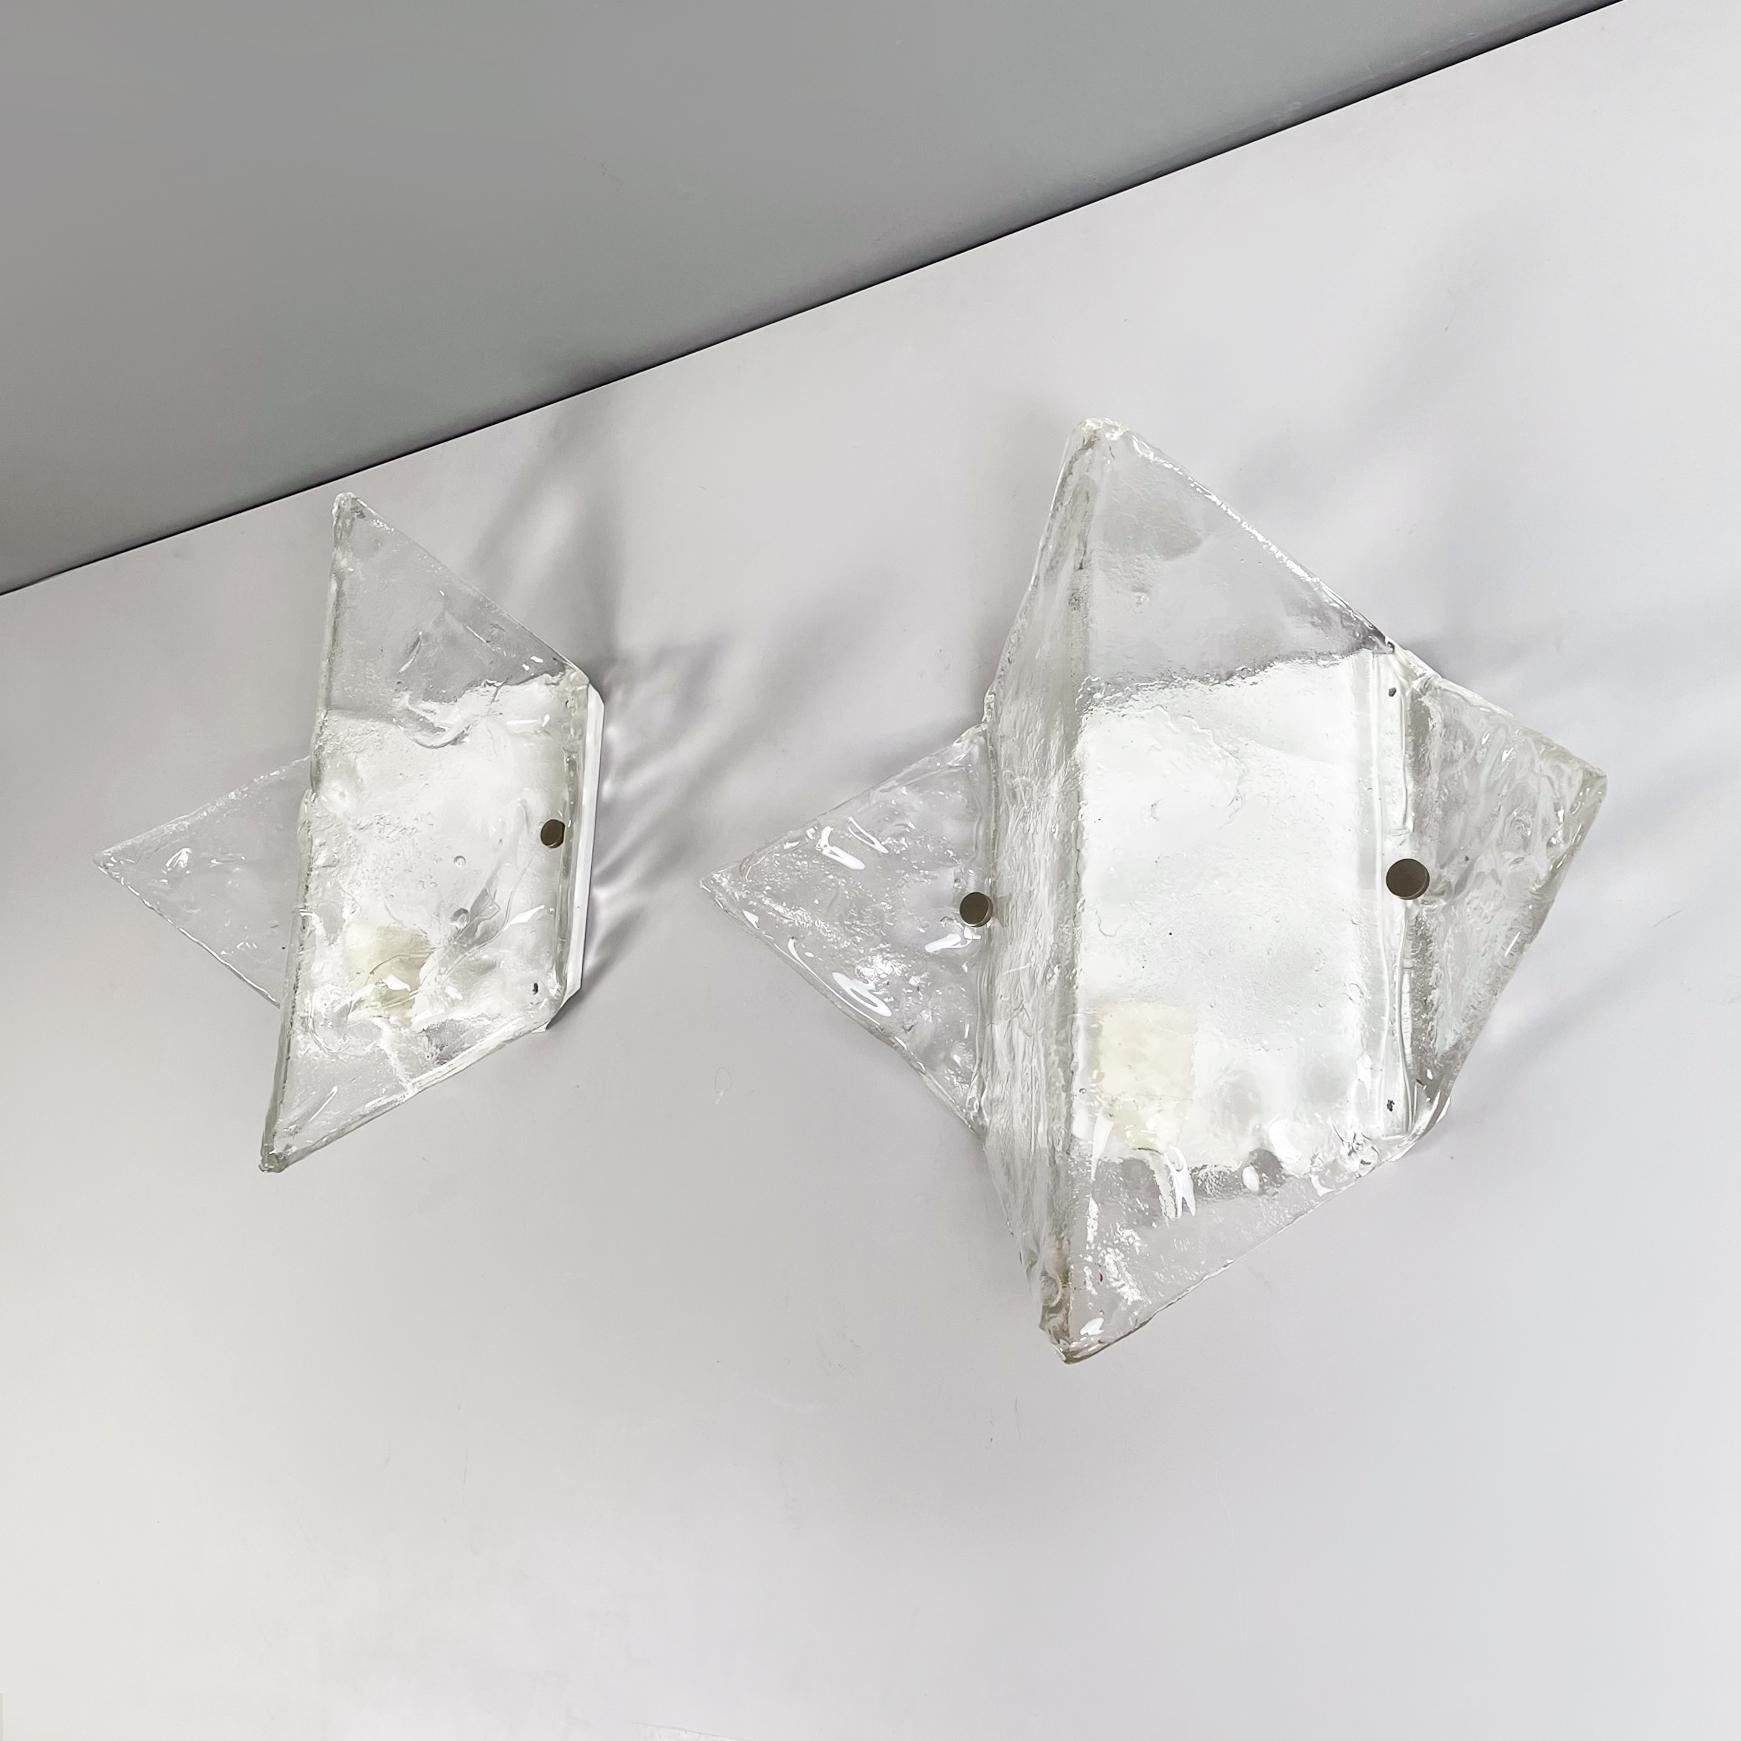 Italian modern Murano glass and white metal wall lamps by Carlo Nason for Mazzega, 1970s
Pair of wall lamps with squared diffuser in finely crafted Murano glass. The square structure is in white painted metal. On the front it has round metal